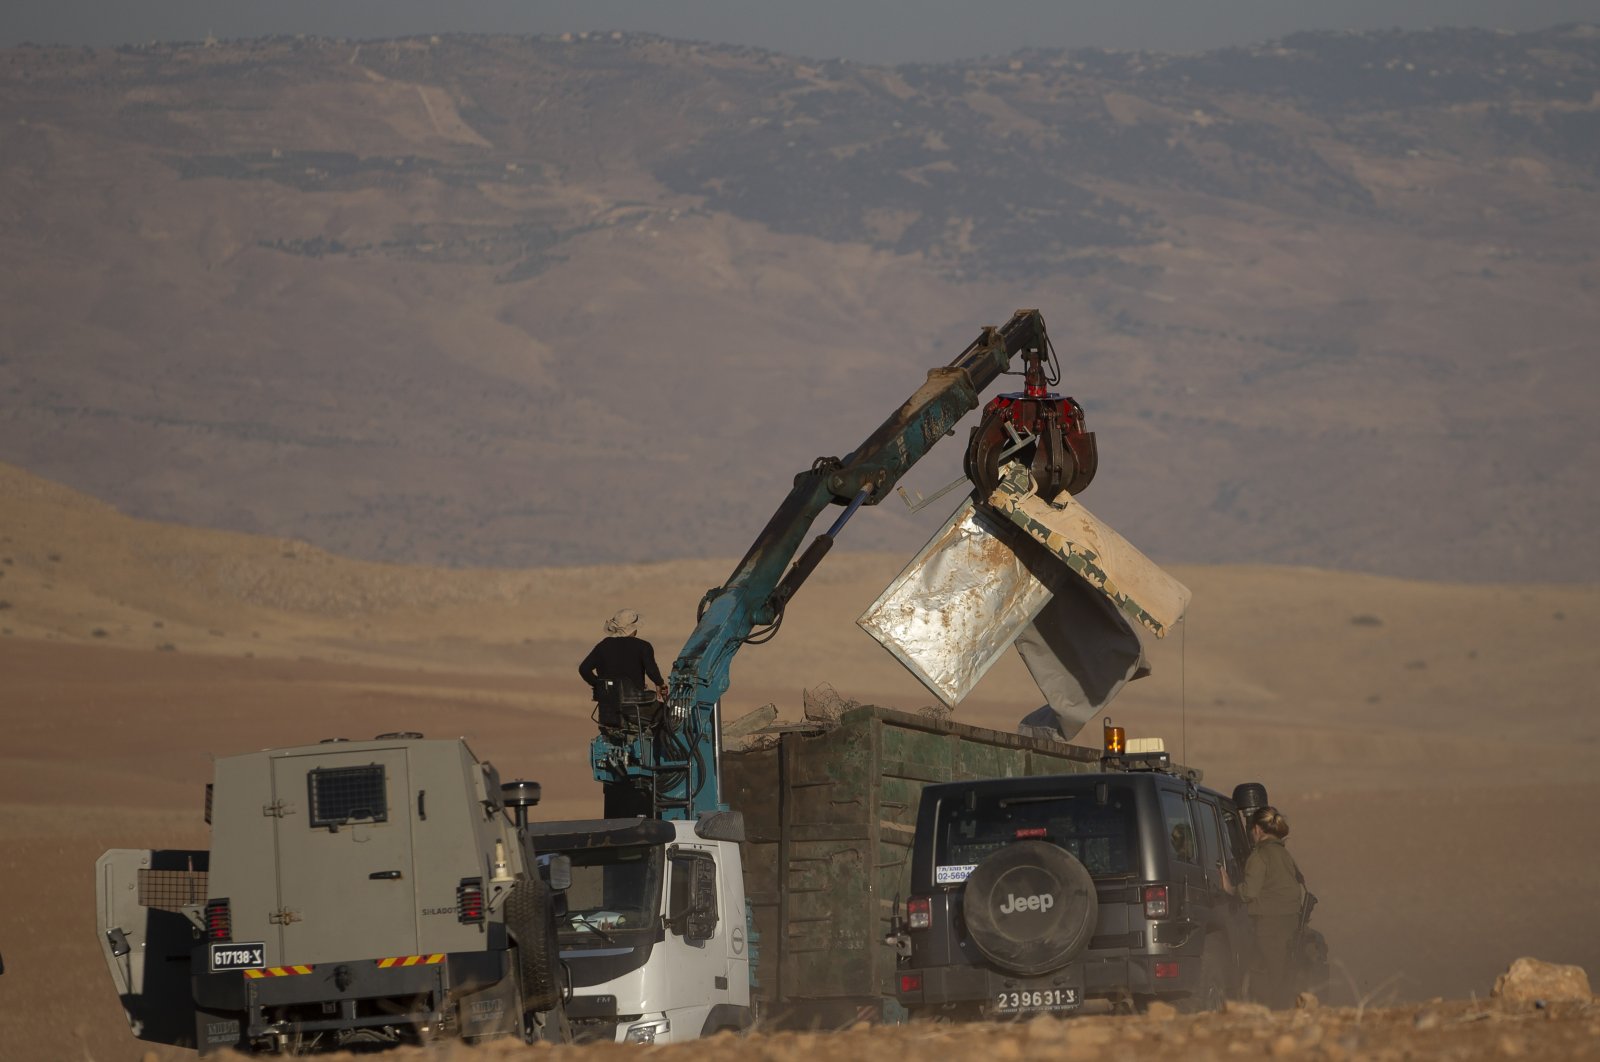 Israeli forces demolish tents and other structures belonging to Bedouins at the Khirbet Humsu hamlet in Jordan Valley in the West Bank, Wednesday, July 7, 2021. (AP Photo)